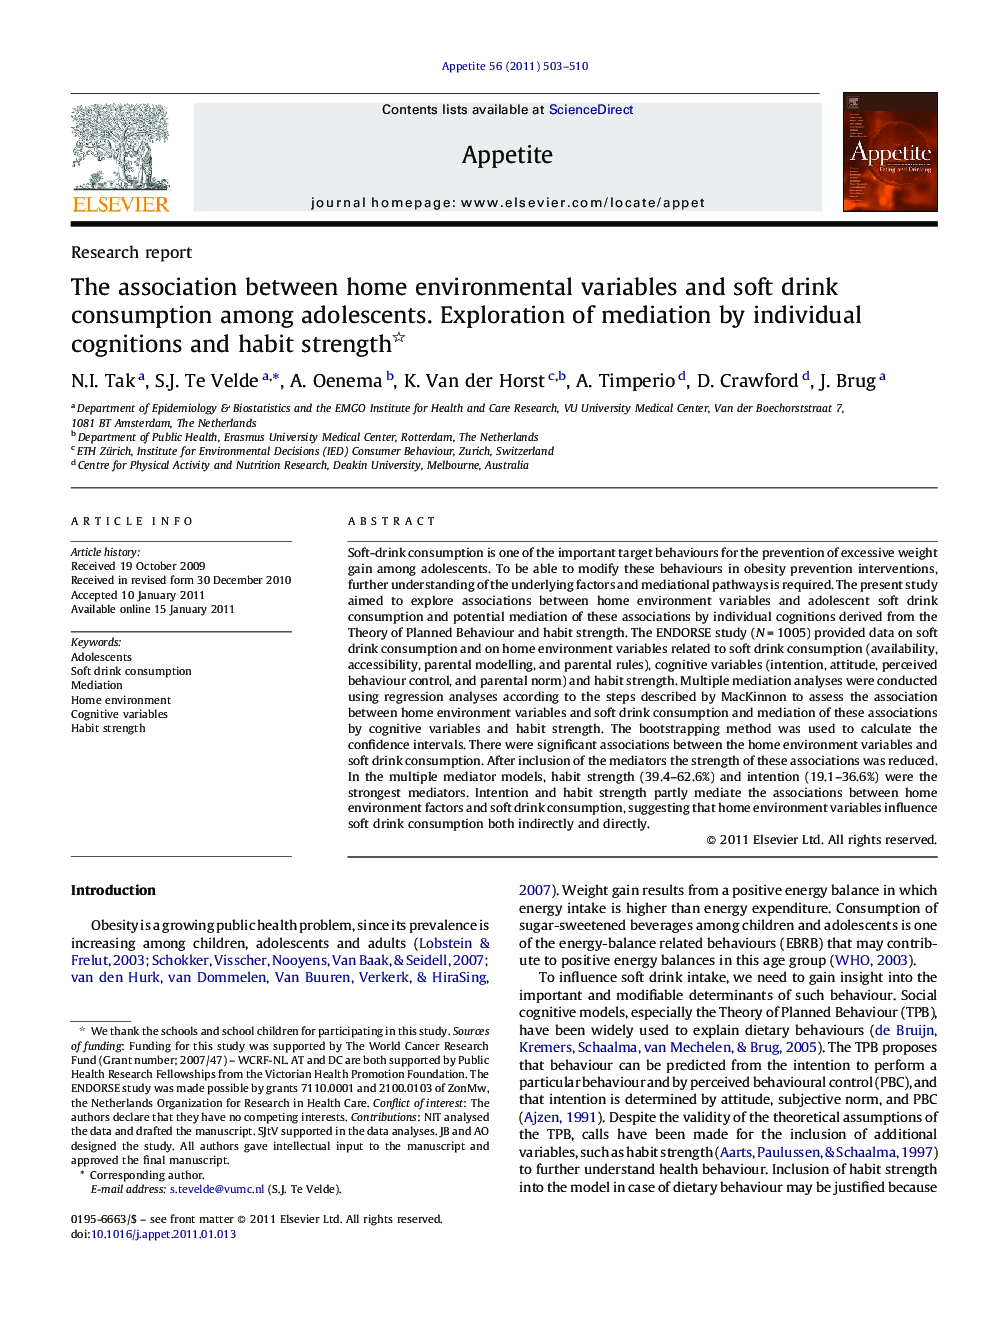 The association between home environmental variables and soft drink consumption among adolescents. Exploration of mediation by individual cognitions and habit strength 